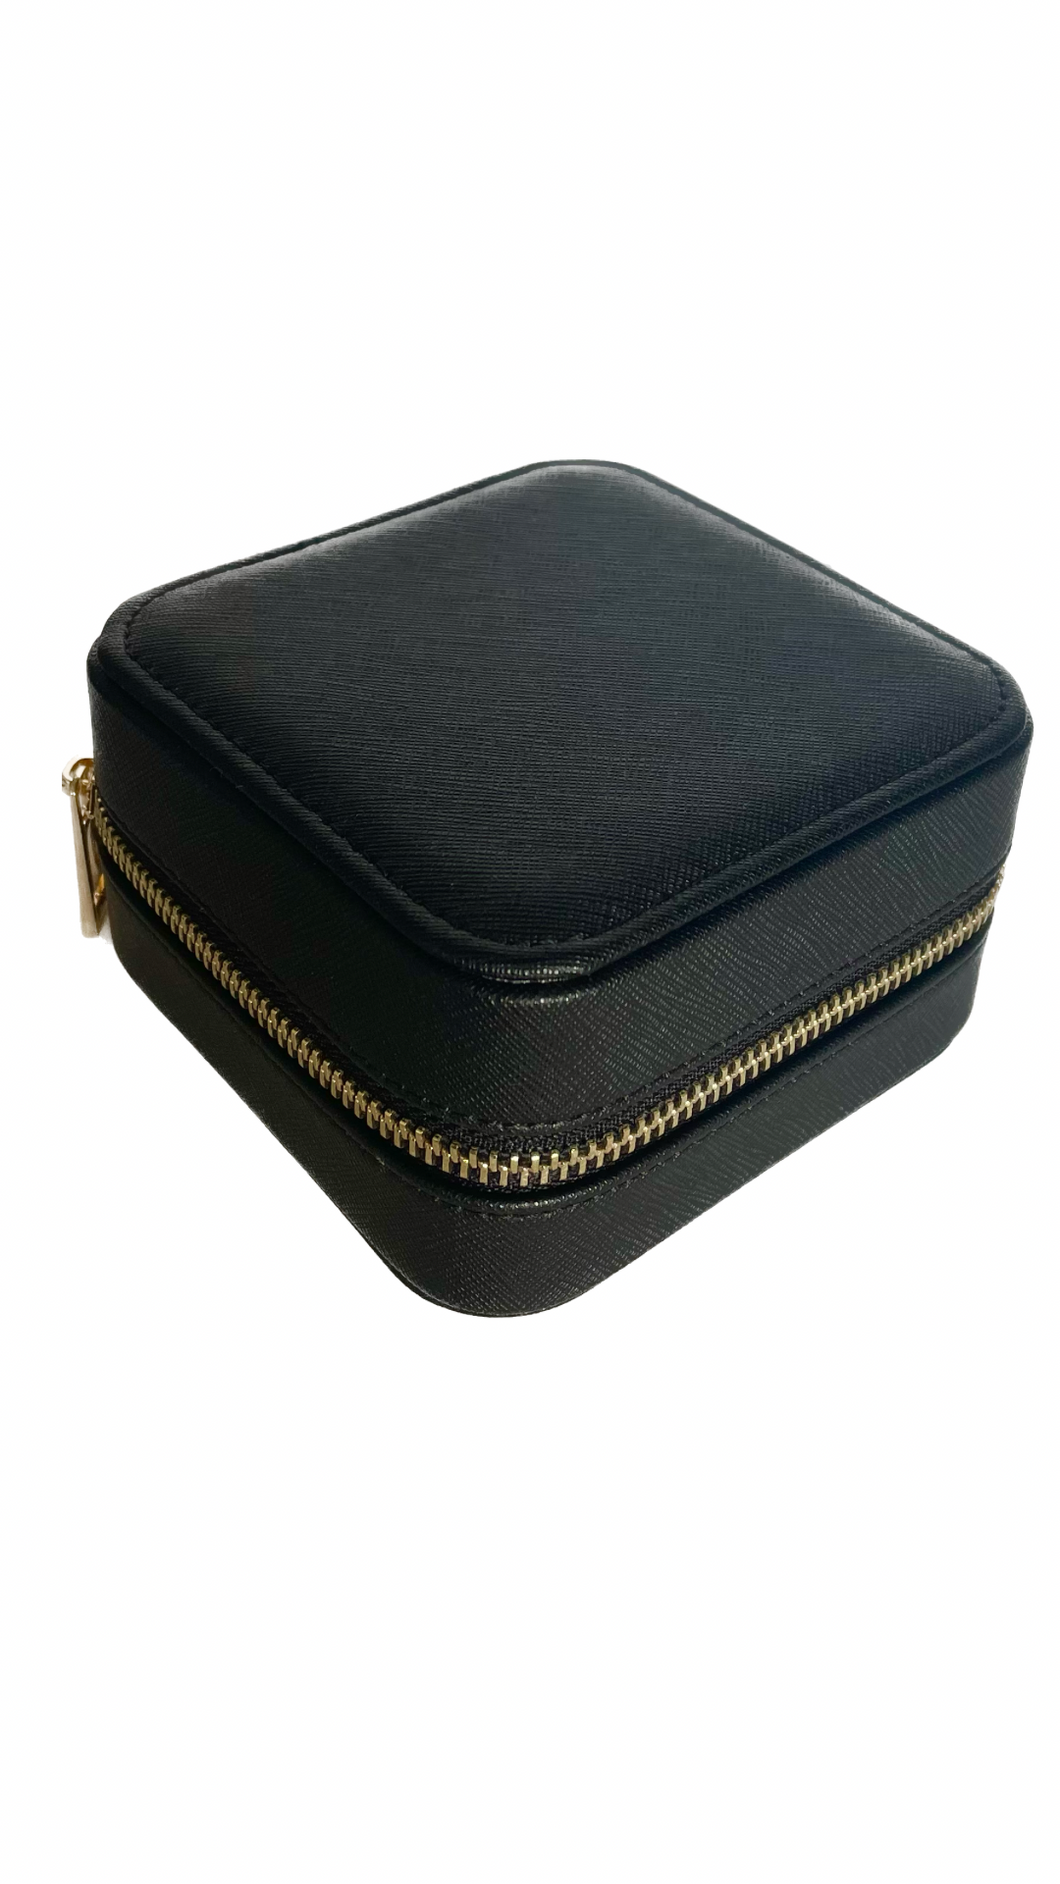  RACHEL BETH JEWELLERY TRAVEL BOXES Ideally sized for traveling, our Saffinao leather jewellery travel boxes have a handy mirror, compartments for your jewellery, and a zipper to keep everything secure.  Colours Available: Burgundy, Nude, Brown & Black  Approx Dimensions: 11.5cm x 11.5cm x 5.8cm  whilst stock lasts  *Boxes come empty 